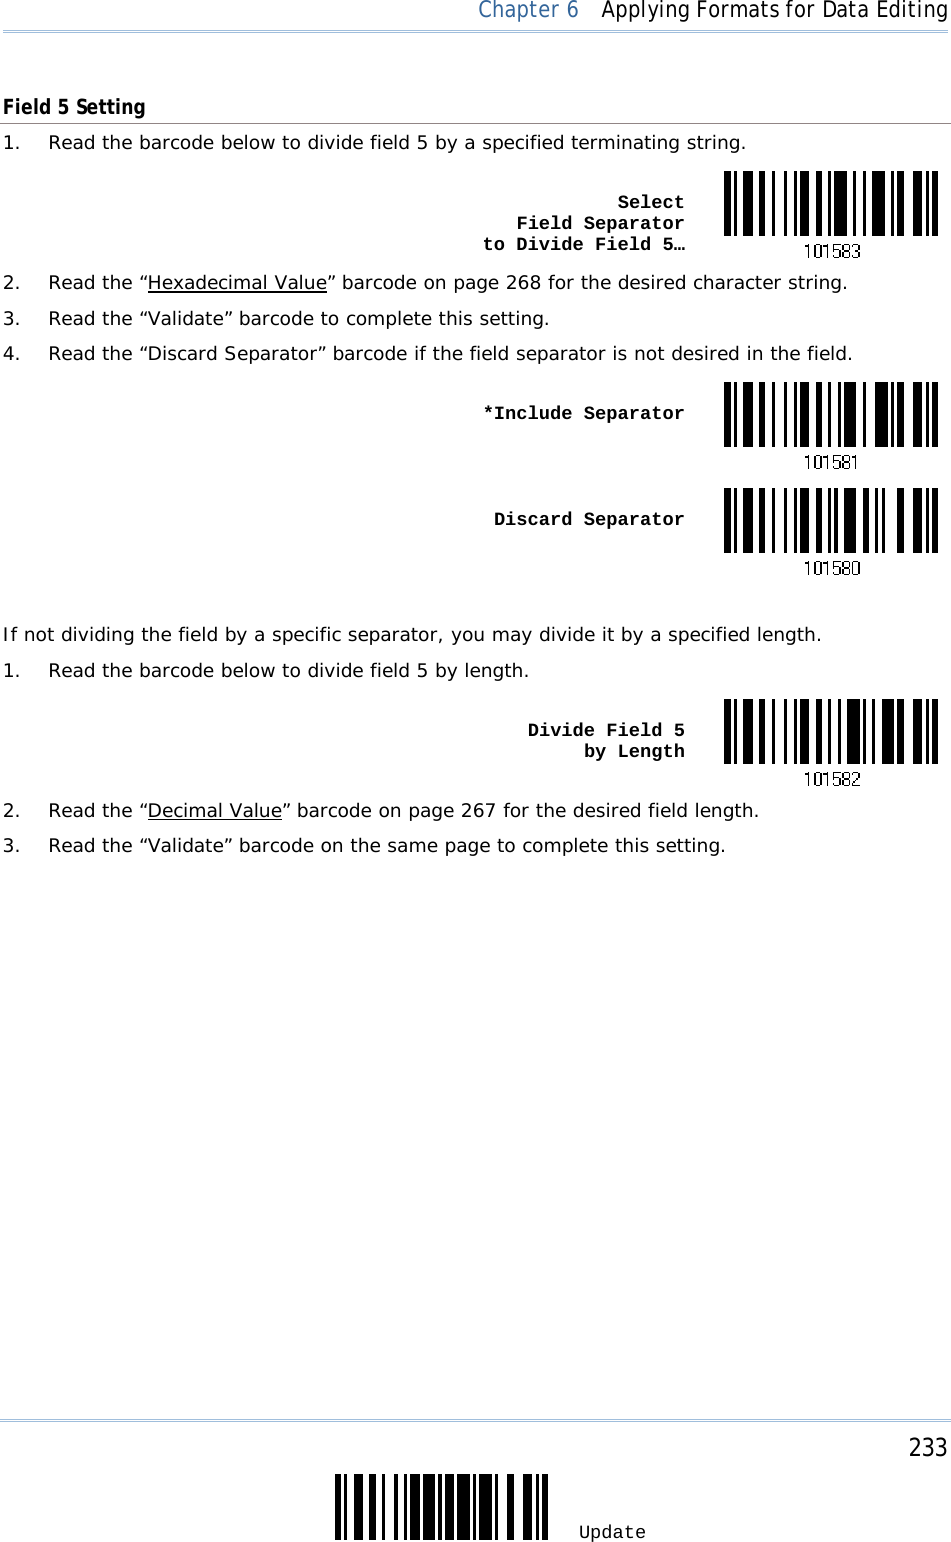     233 Update  Chapter 6  Applying Formats for Data Editing Field 5 Setting 1.  Read the barcode below to divide field 5 by a specified terminating string.  Select  Field Separator  to Divide Field 5…2.  Read the “Hexadecimal Value” barcode on page 268 for the desired character string. 3.  Read the “Validate” barcode to complete this setting. 4.  Read the “Discard Separator” barcode if the field separator is not desired in the field.  *Include Separator Discard Separator If not dividing the field by a specific separator, you may divide it by a specified length. 1.  Read the barcode below to divide field 5 by length.  Divide Field 5  by Length2.  Read the “Decimal Value” barcode on page 267 for the desired field length. 3.  Read the “Validate” barcode on the same page to complete this setting.         